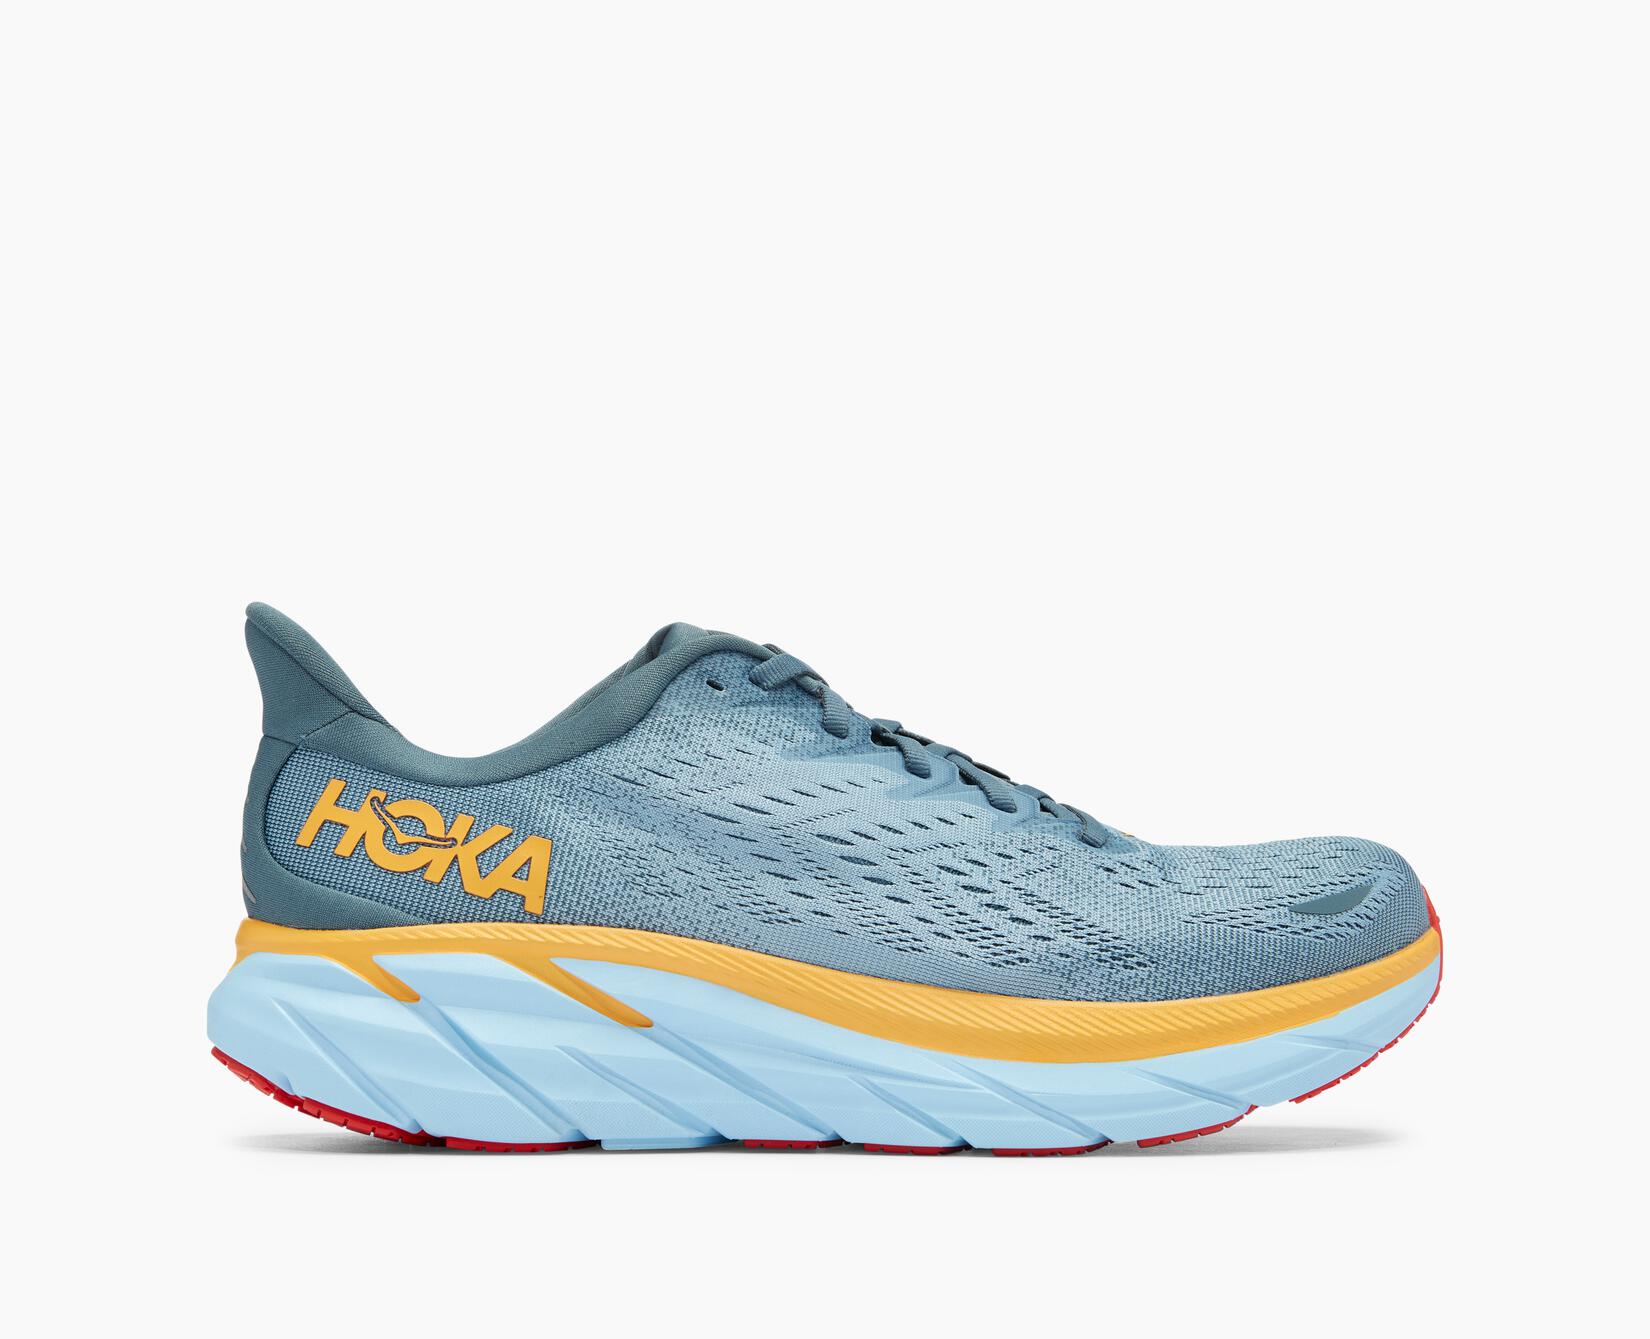 Where Can You Buy Hoka Shoes in Store?